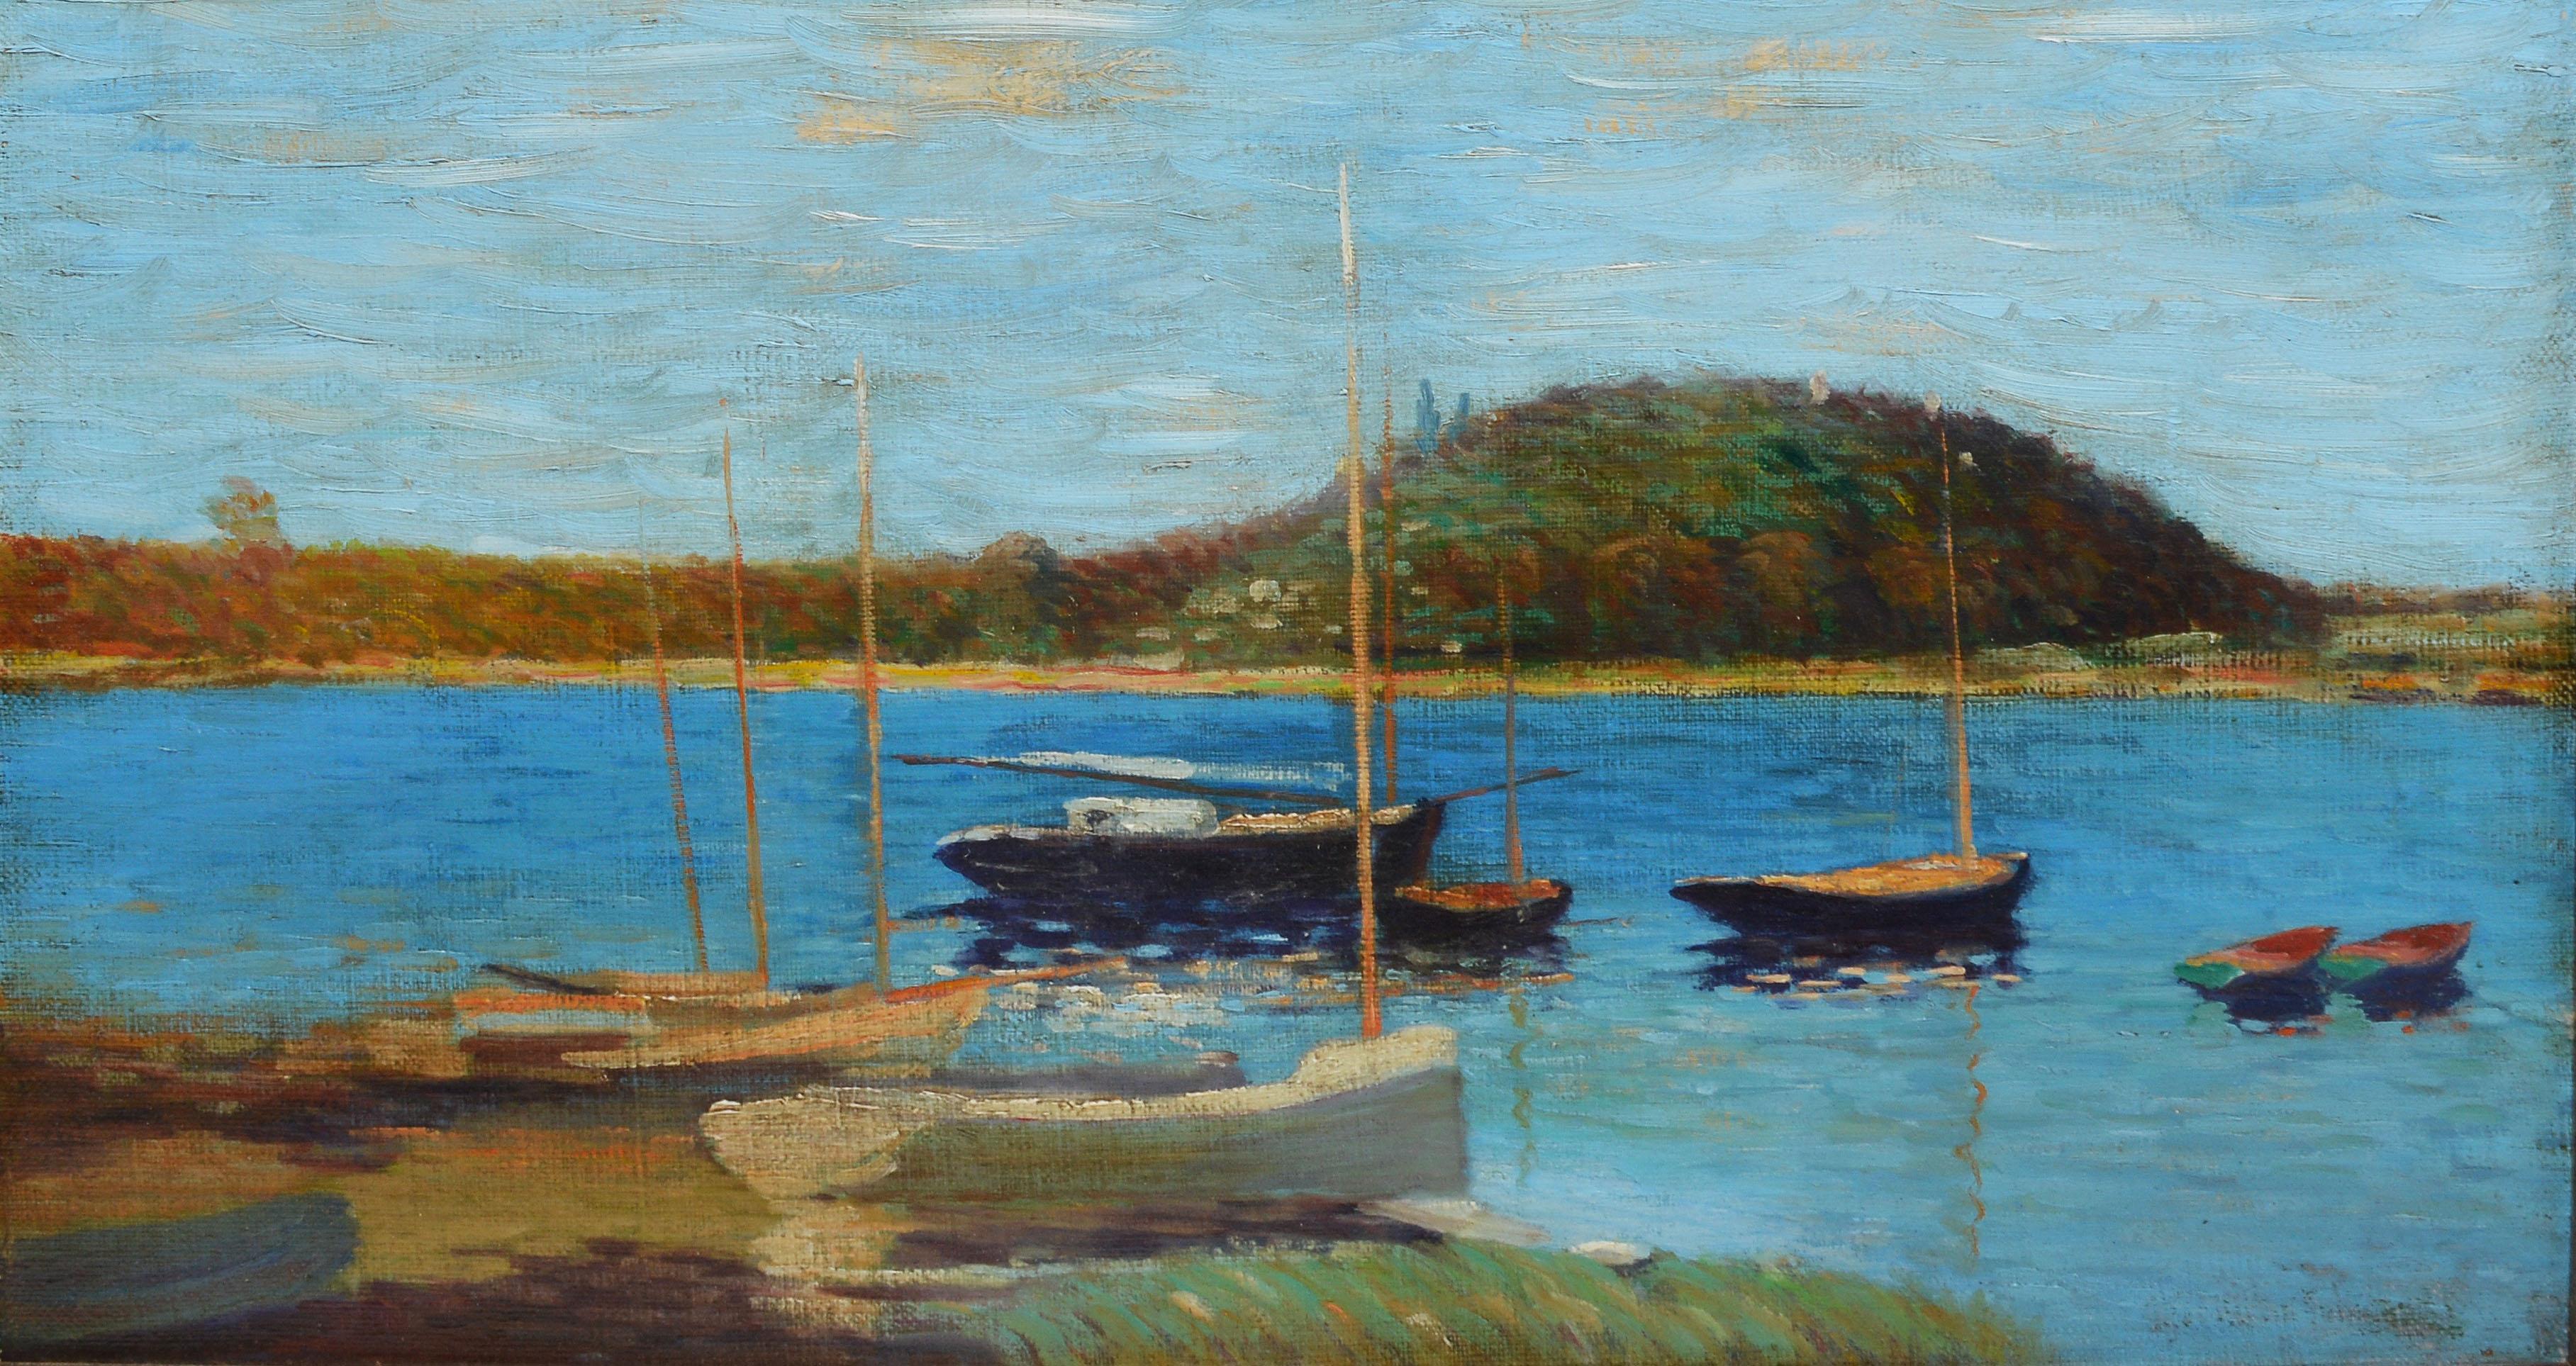 Impressionist view of a lake with boats.  Oil on canvas, circa 1900.  Unsigned.  Displayed in a silver leaf frame.  Image size, 24